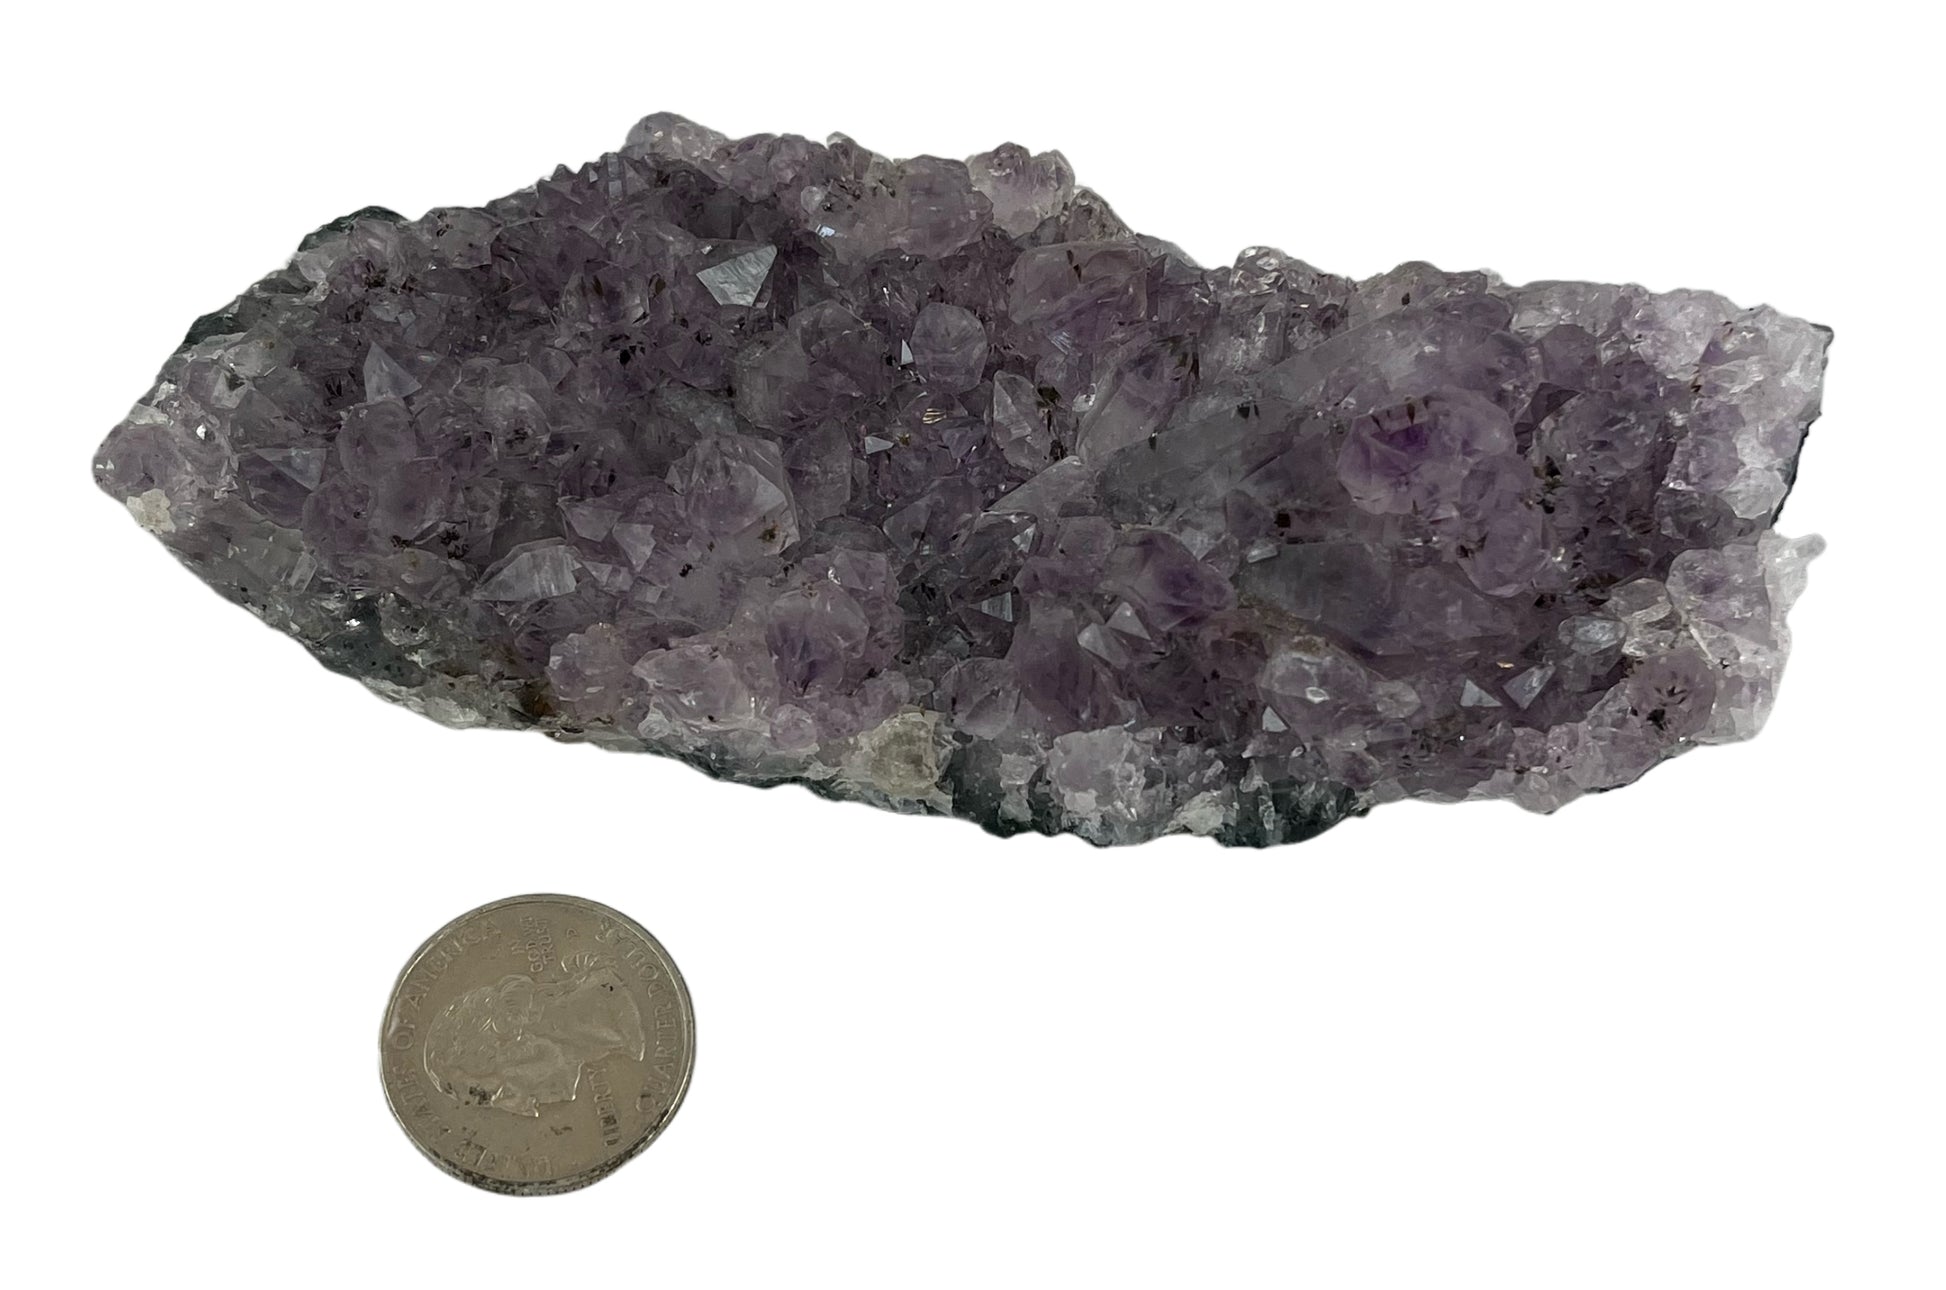 Larger than palm sized purple crystal, roughly 2.5 in by 5 in